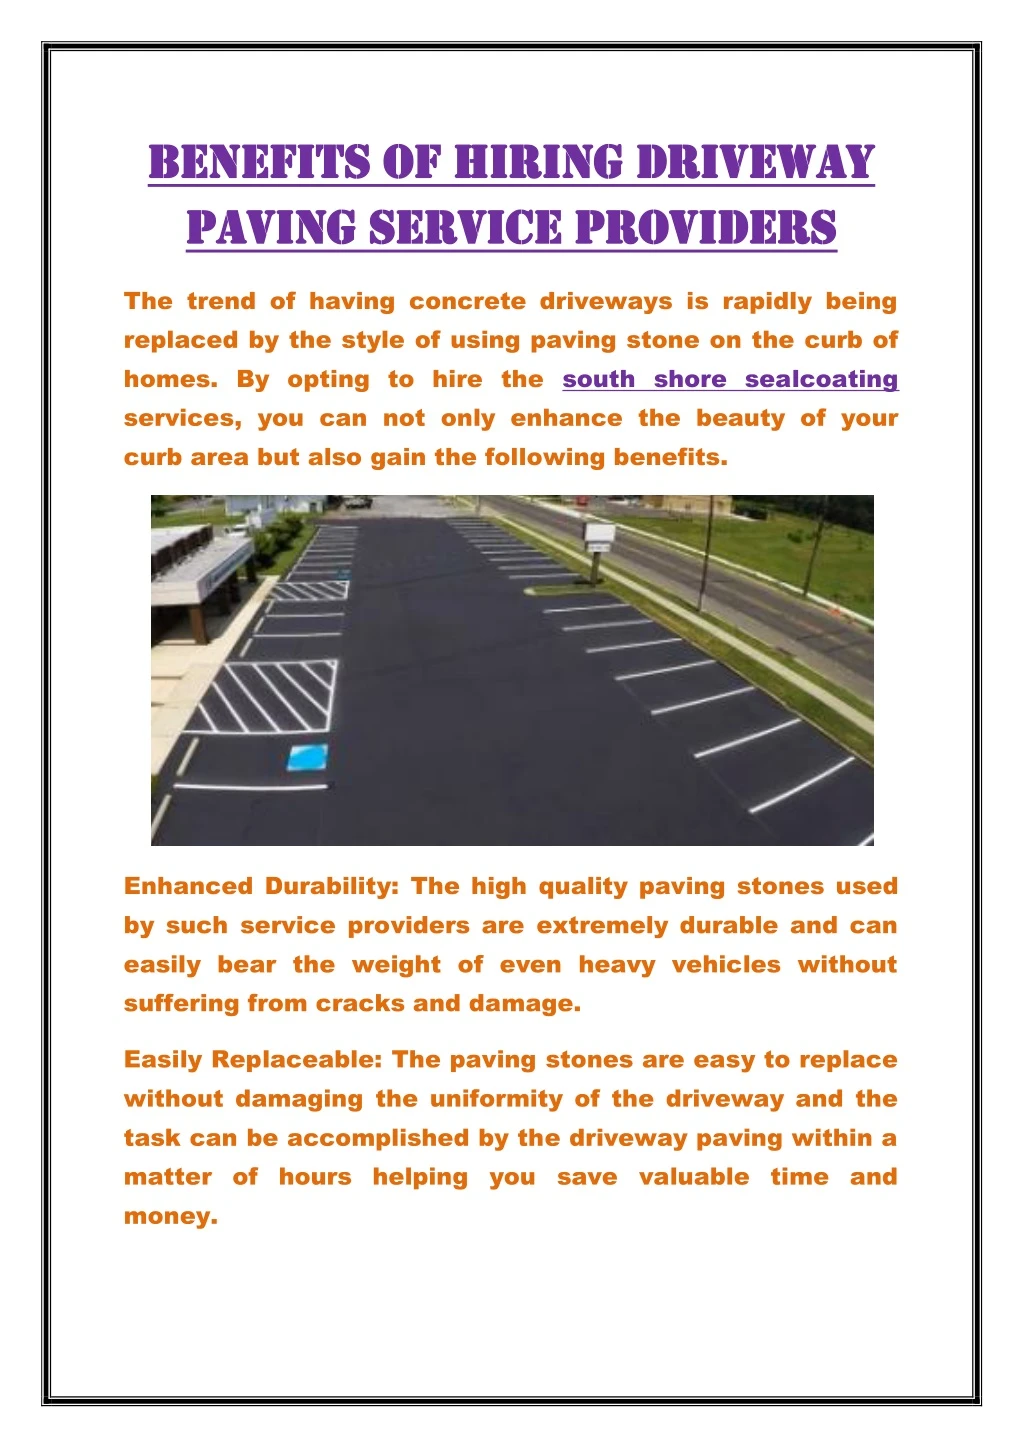 benefits benefits of paving service providers